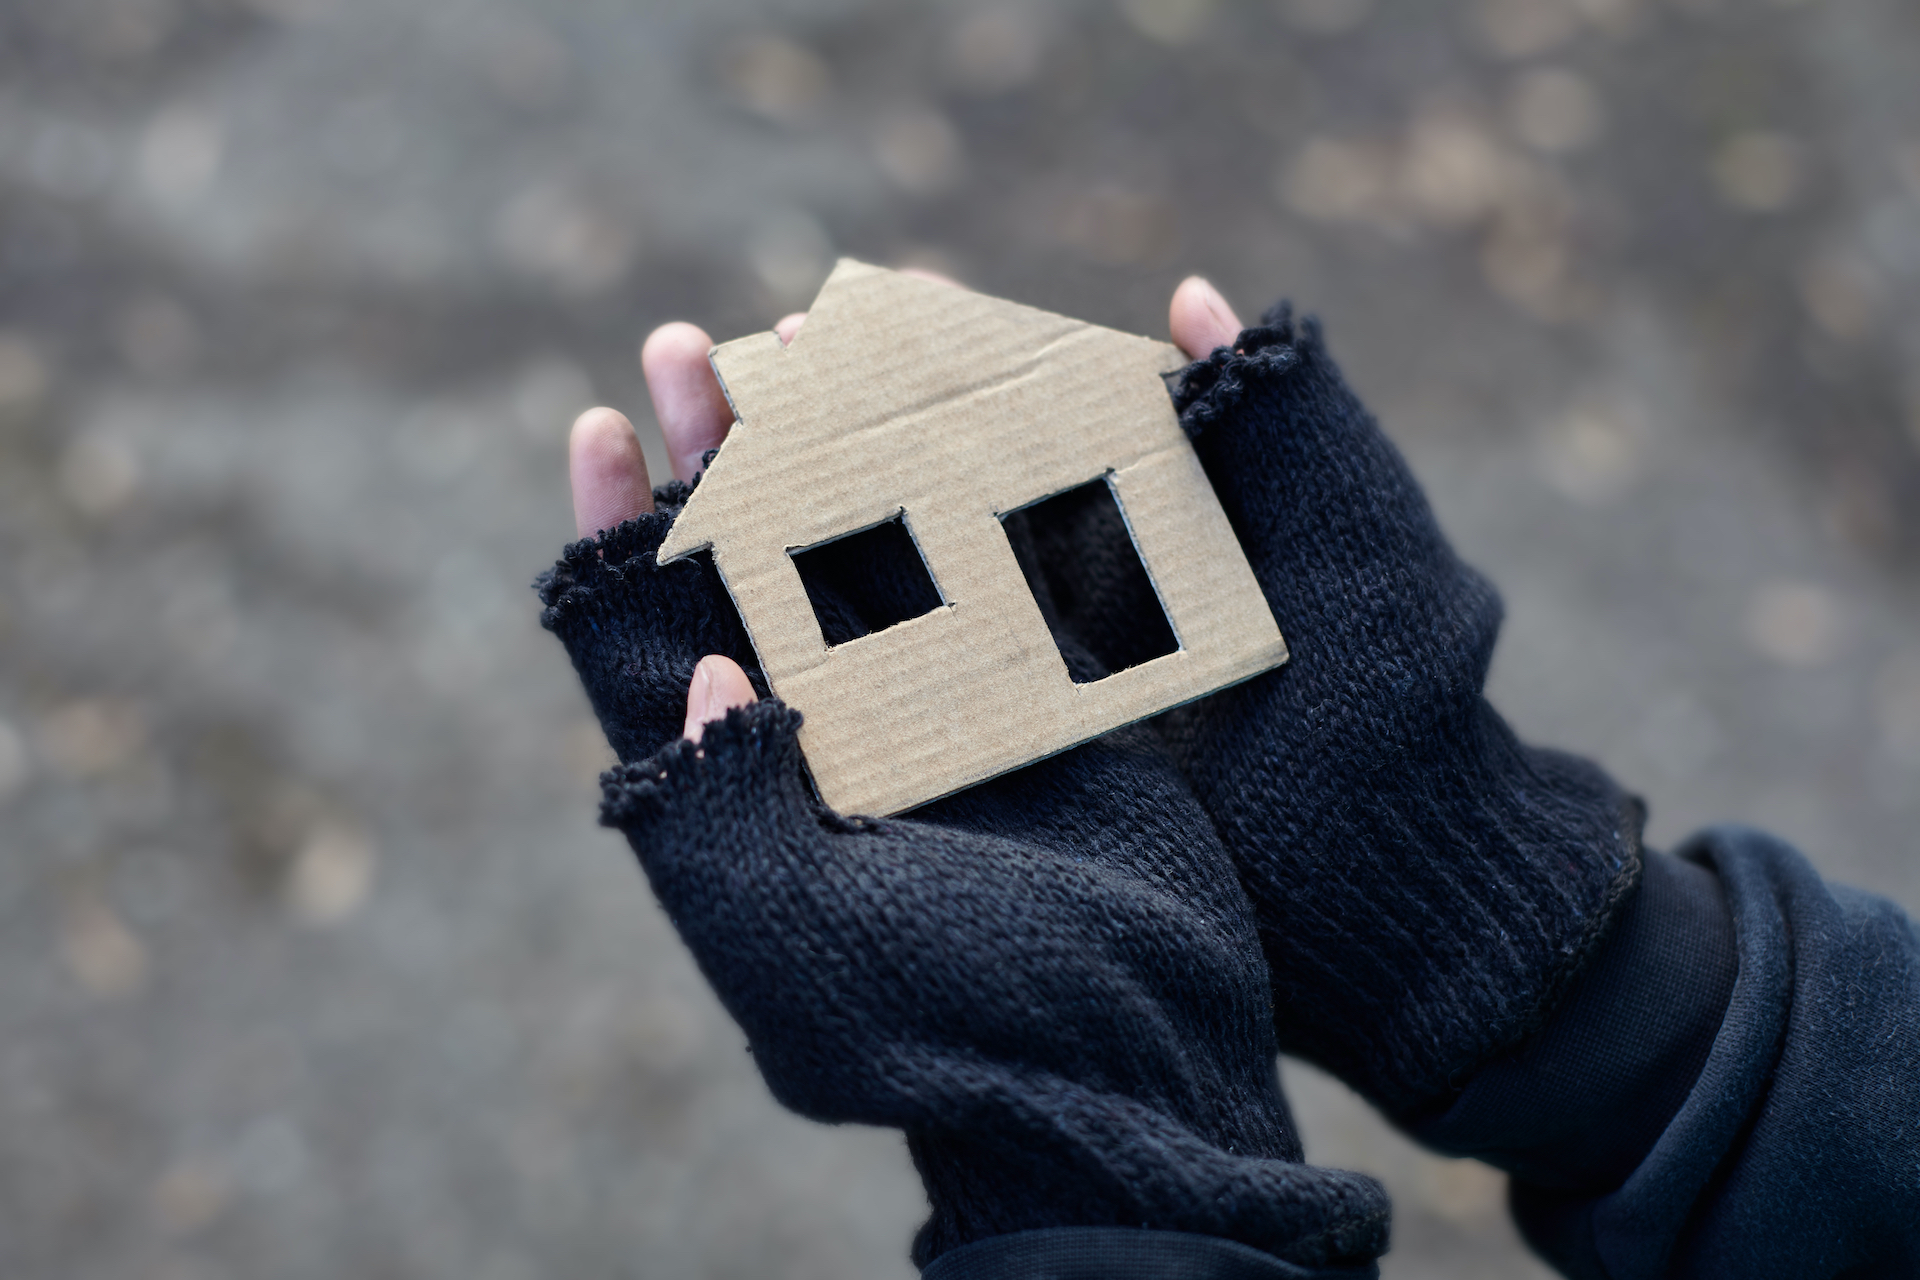 Pair of hands wearing wool gloves holding a small cardboard house